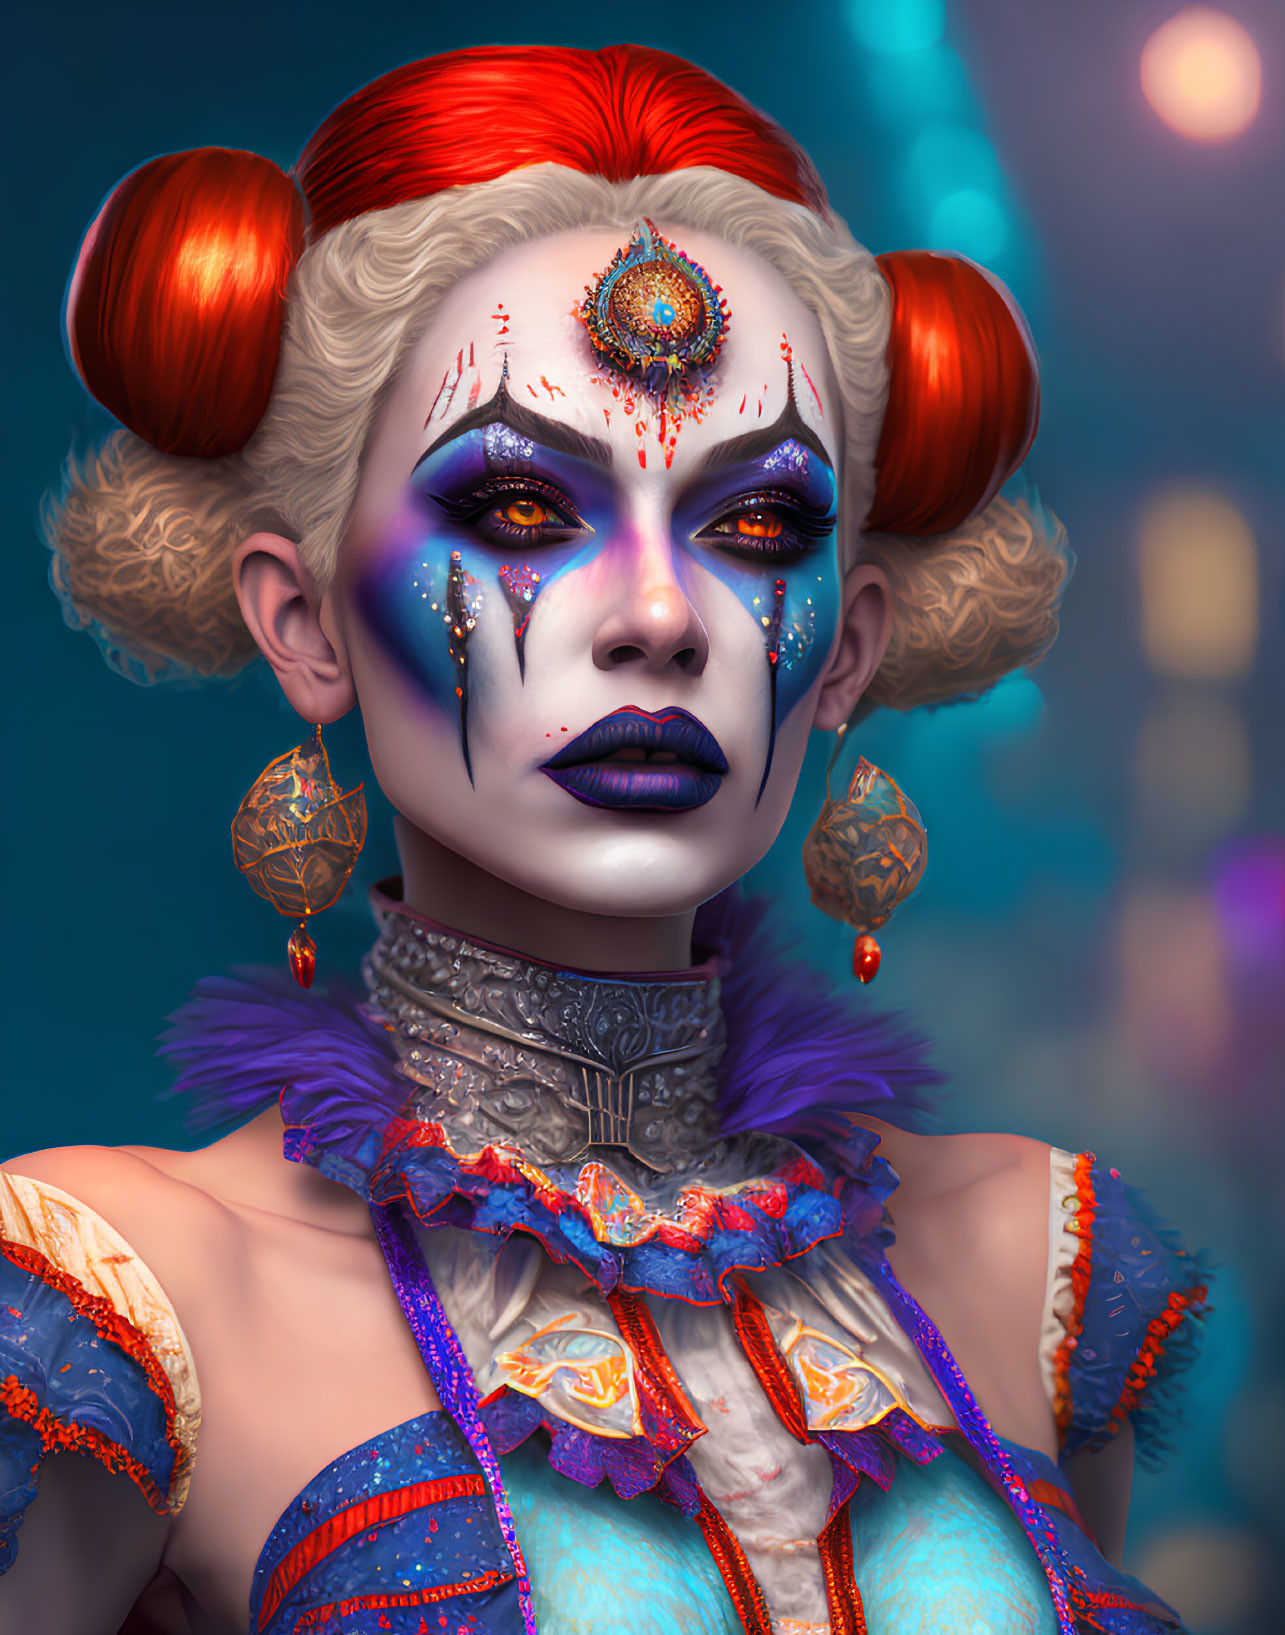 Portrait of Woman with White Face Paint, Red Hair, Carnival Makeup, and Jeweled Accents on